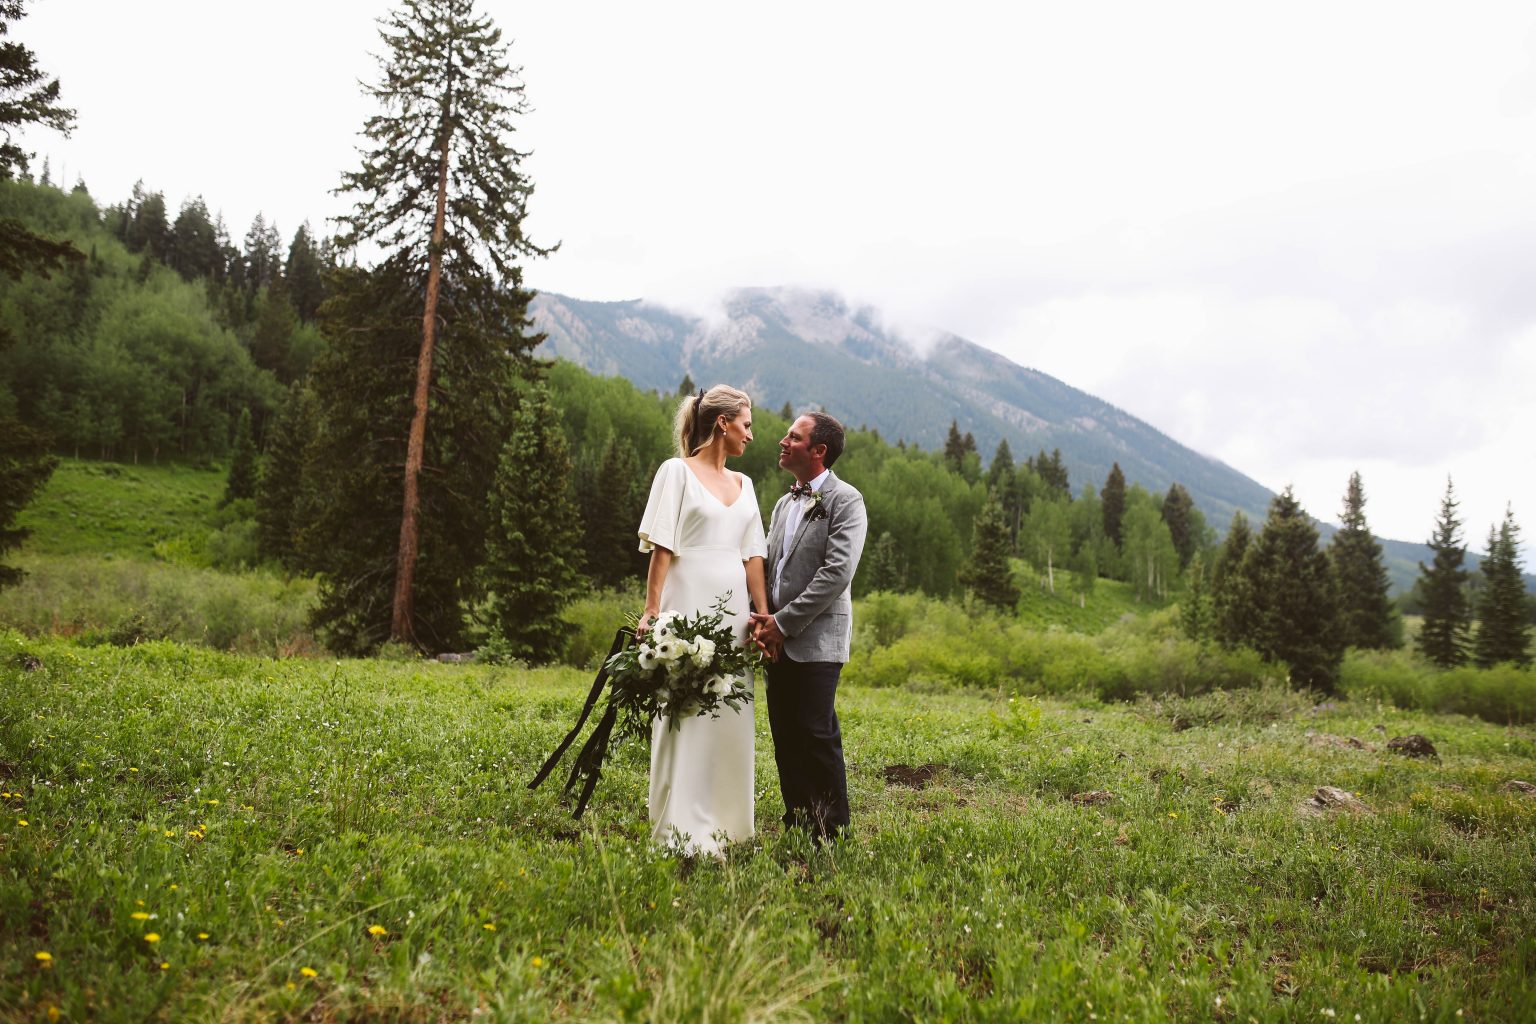 Olena + Bobby's Modern Crested Butte Wedding high in the mountains